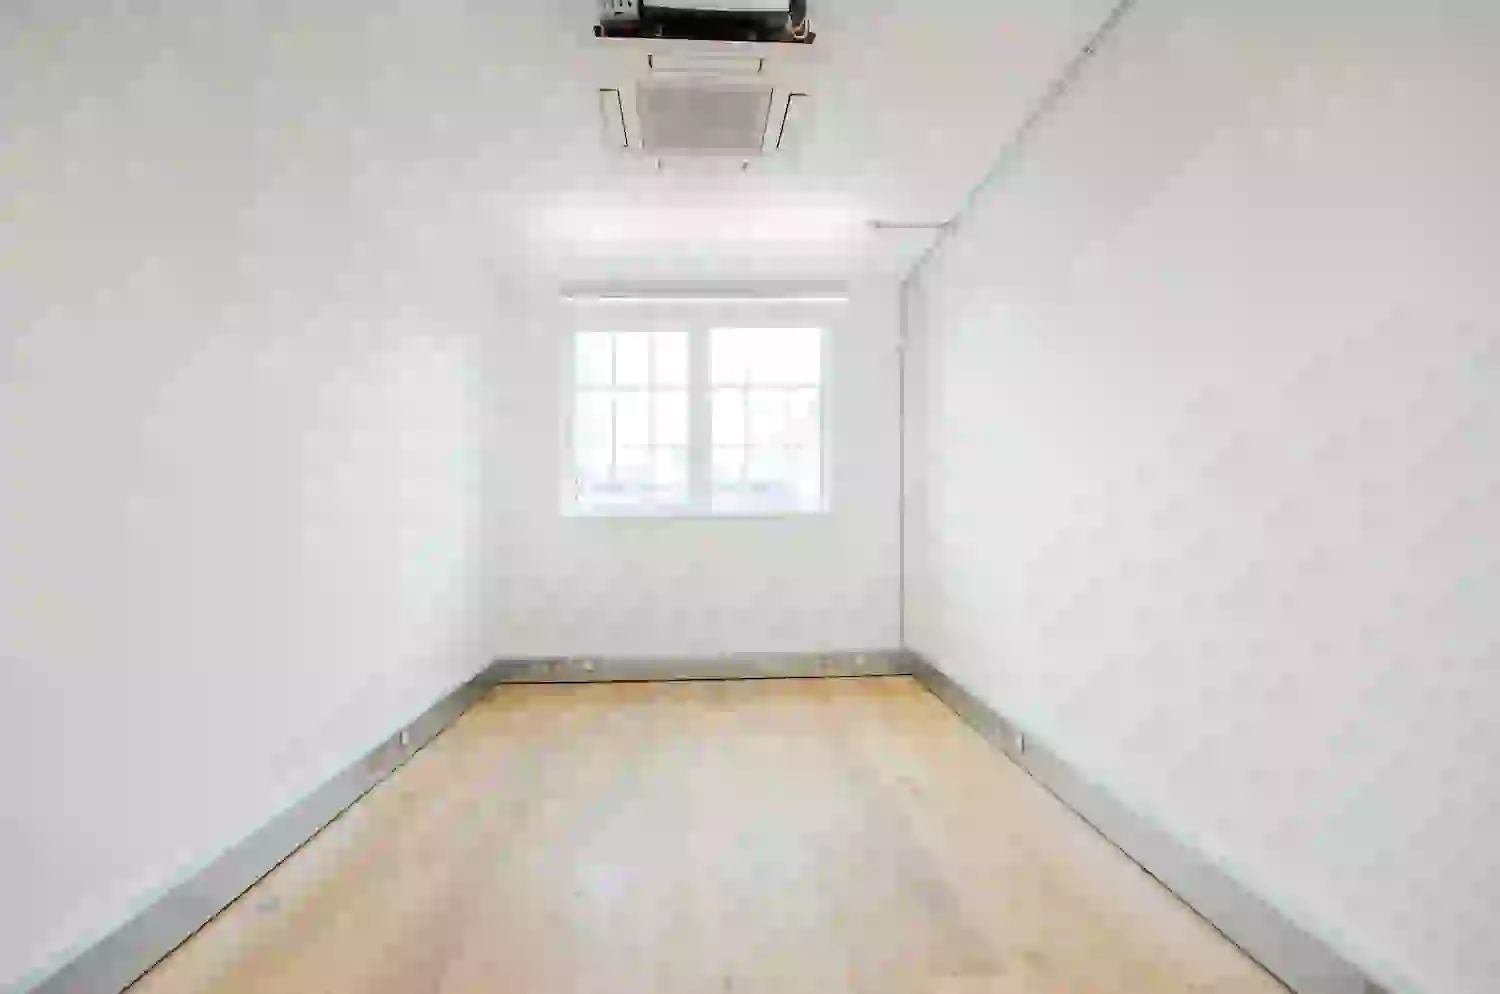 Office space to rent at The Print Rooms, 164/180 Union Street, Waterloo, London, unit LI.406, 141 sq ft (13 sq m).